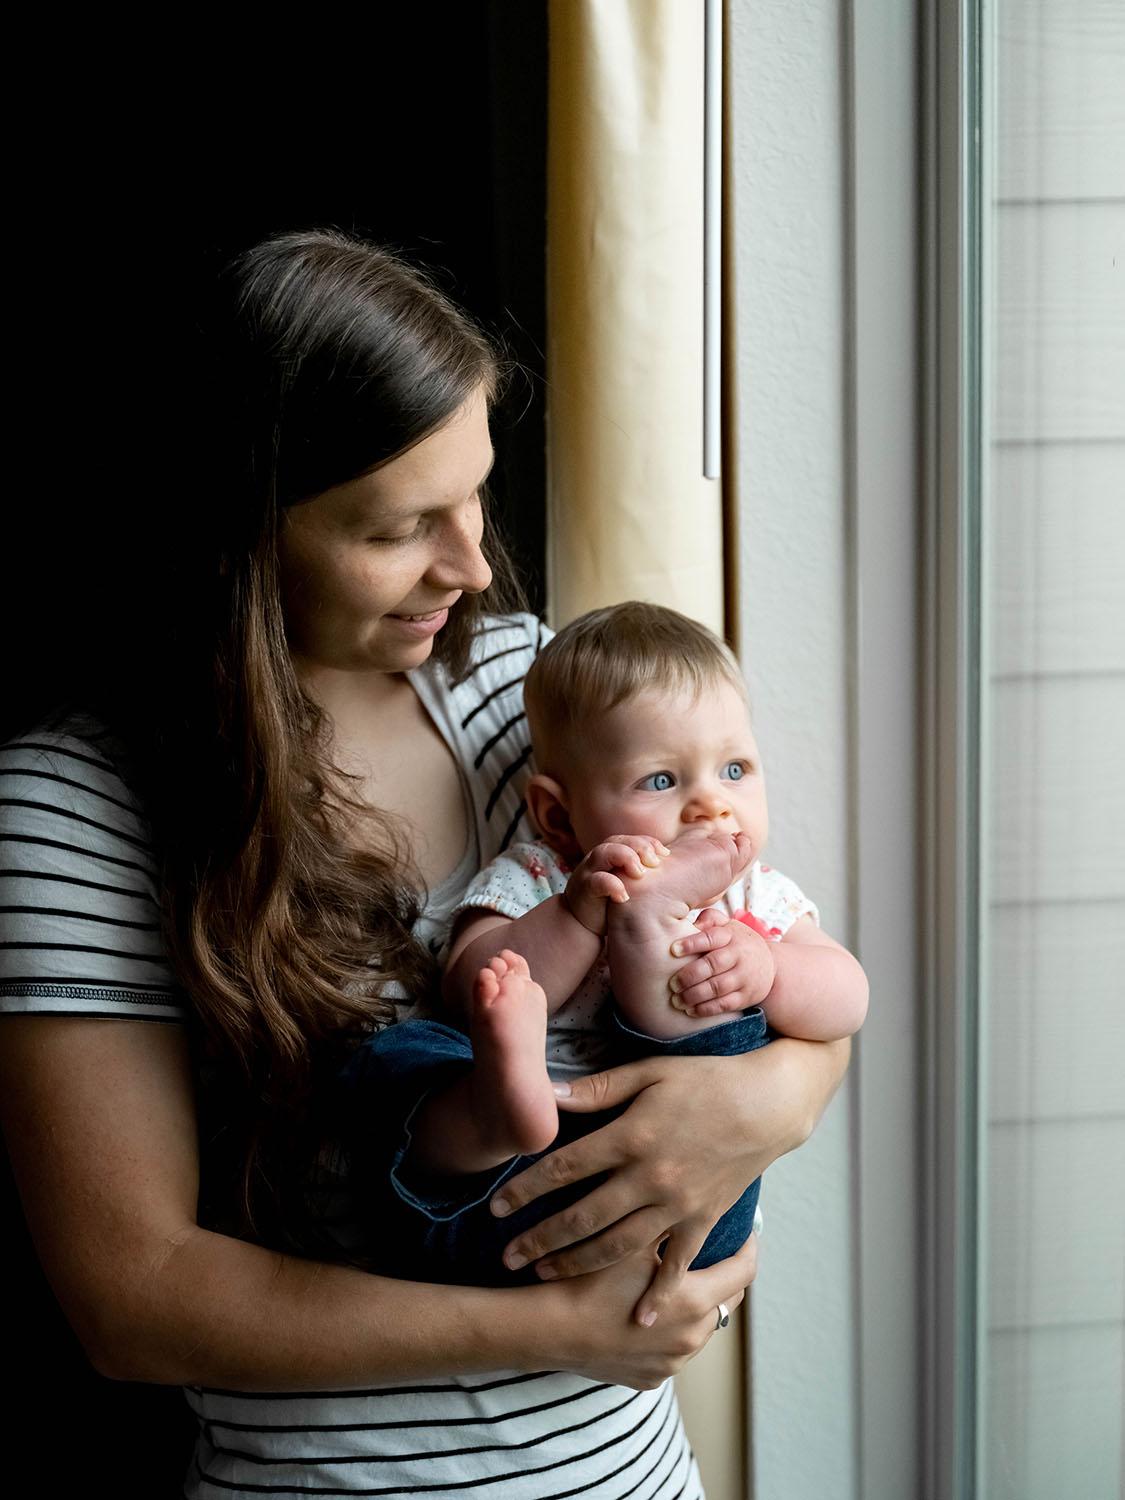 A woman stands near a window looking down at a toddler in her arms .The toddler looks out the window, holding her foot to her face.